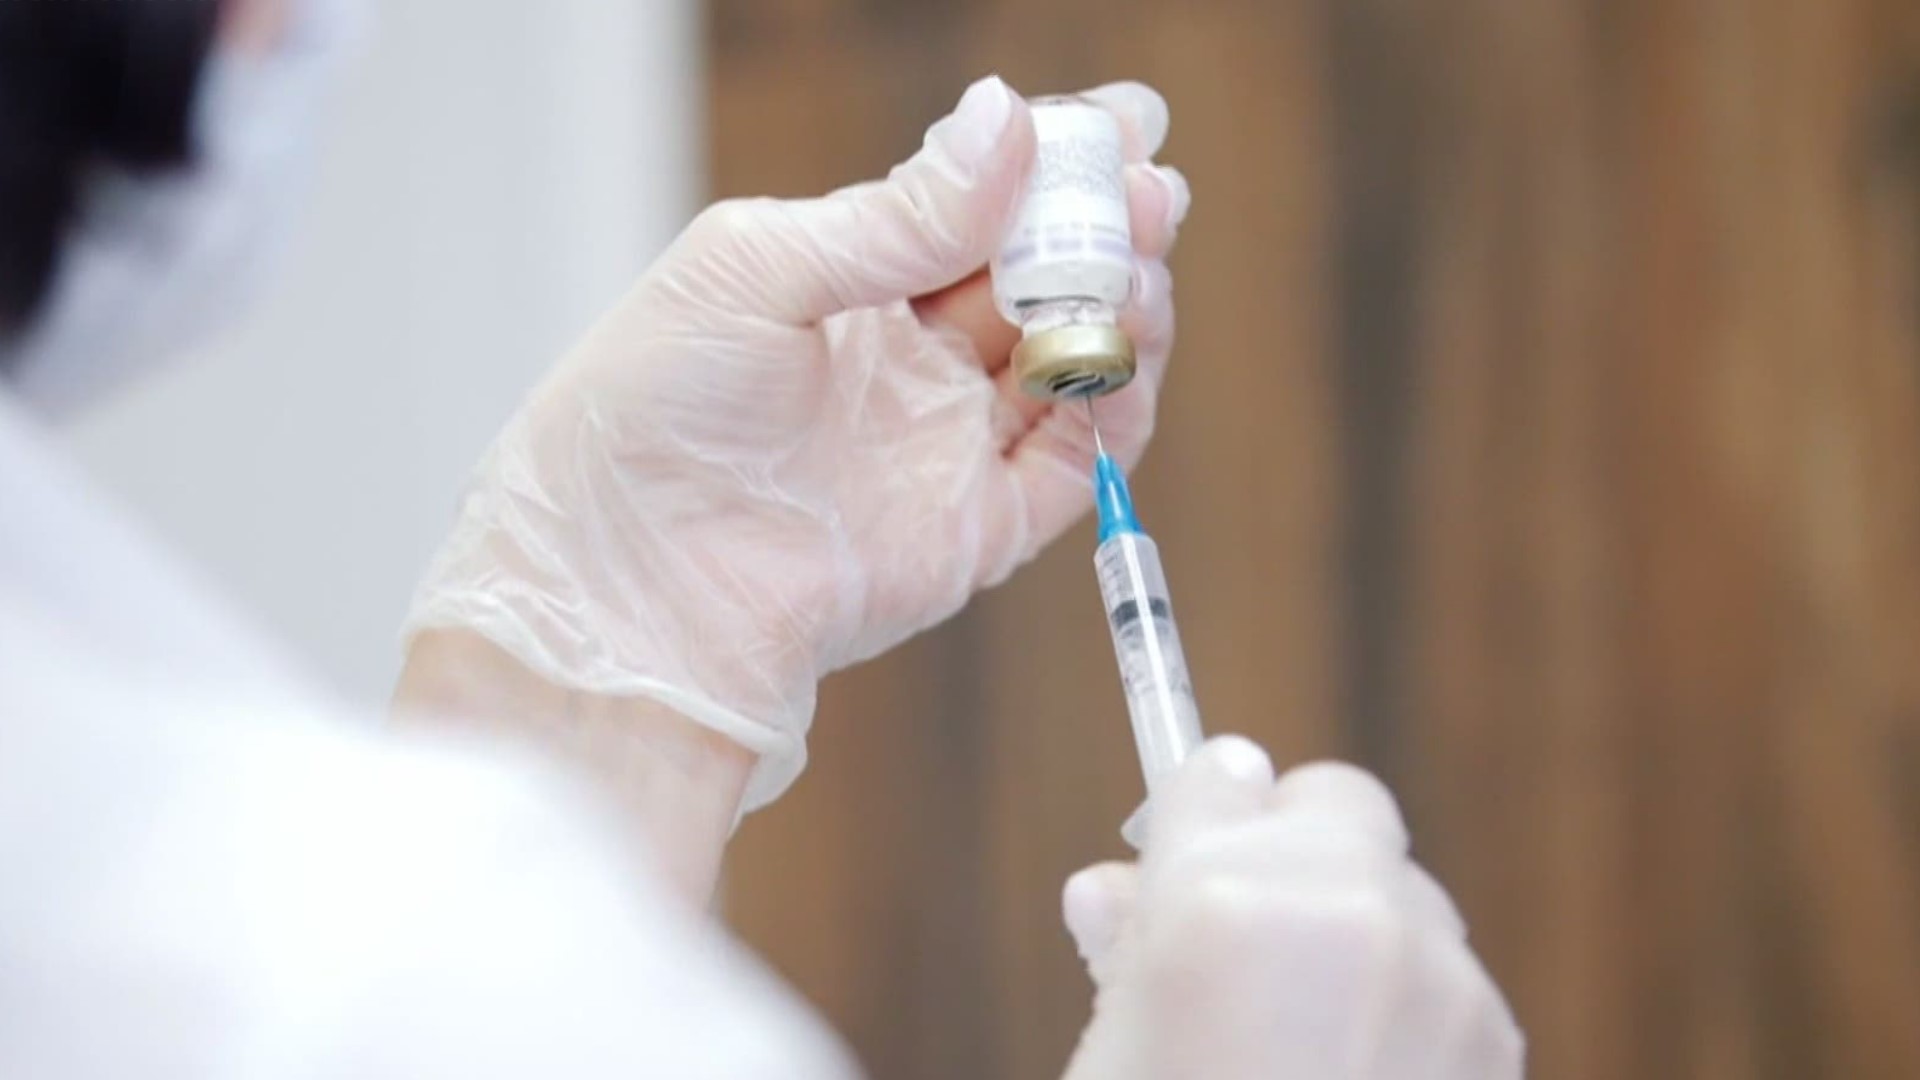 It takes time to get vaccine doses to healthcare workers and people in senior living facilities, but some are pushing for quicker vaccinations.